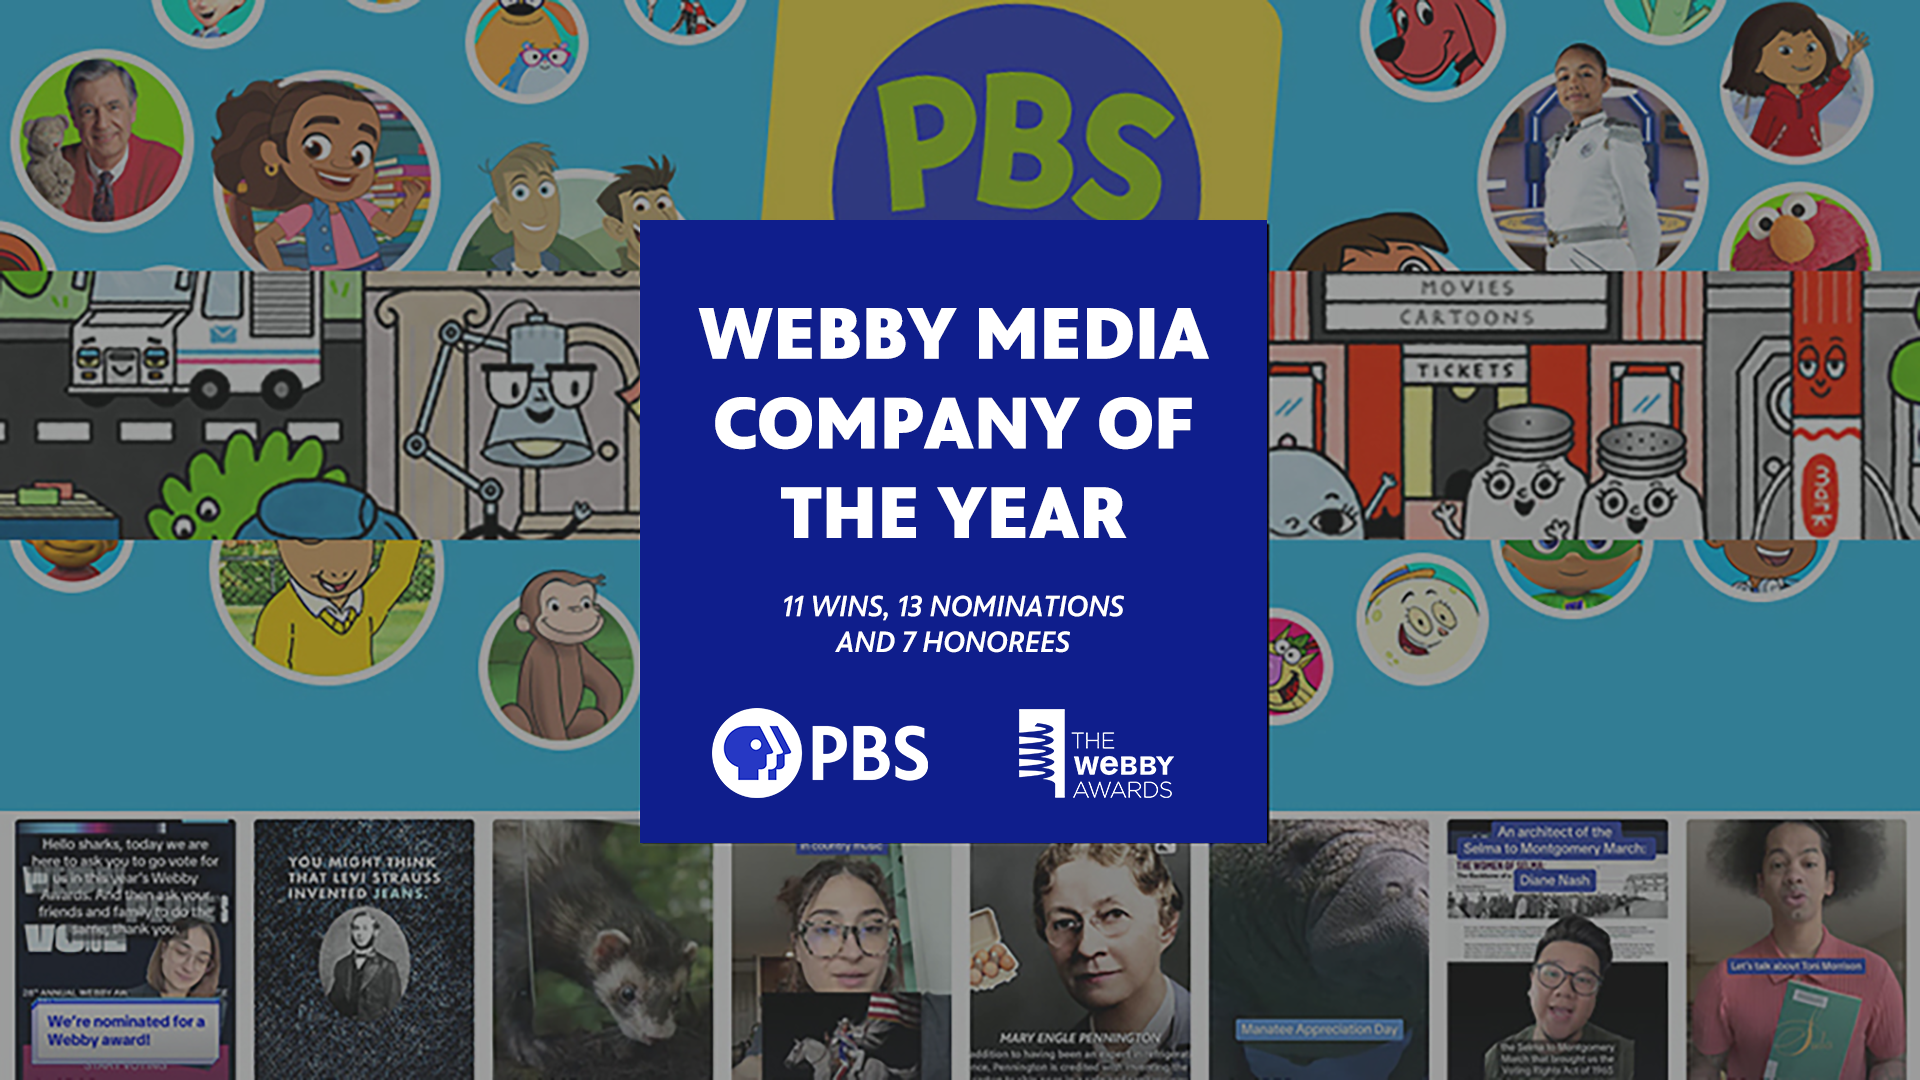 PBS Wins Media Company of the Year, People's Voice Awards at 28th Annual Webby Awards